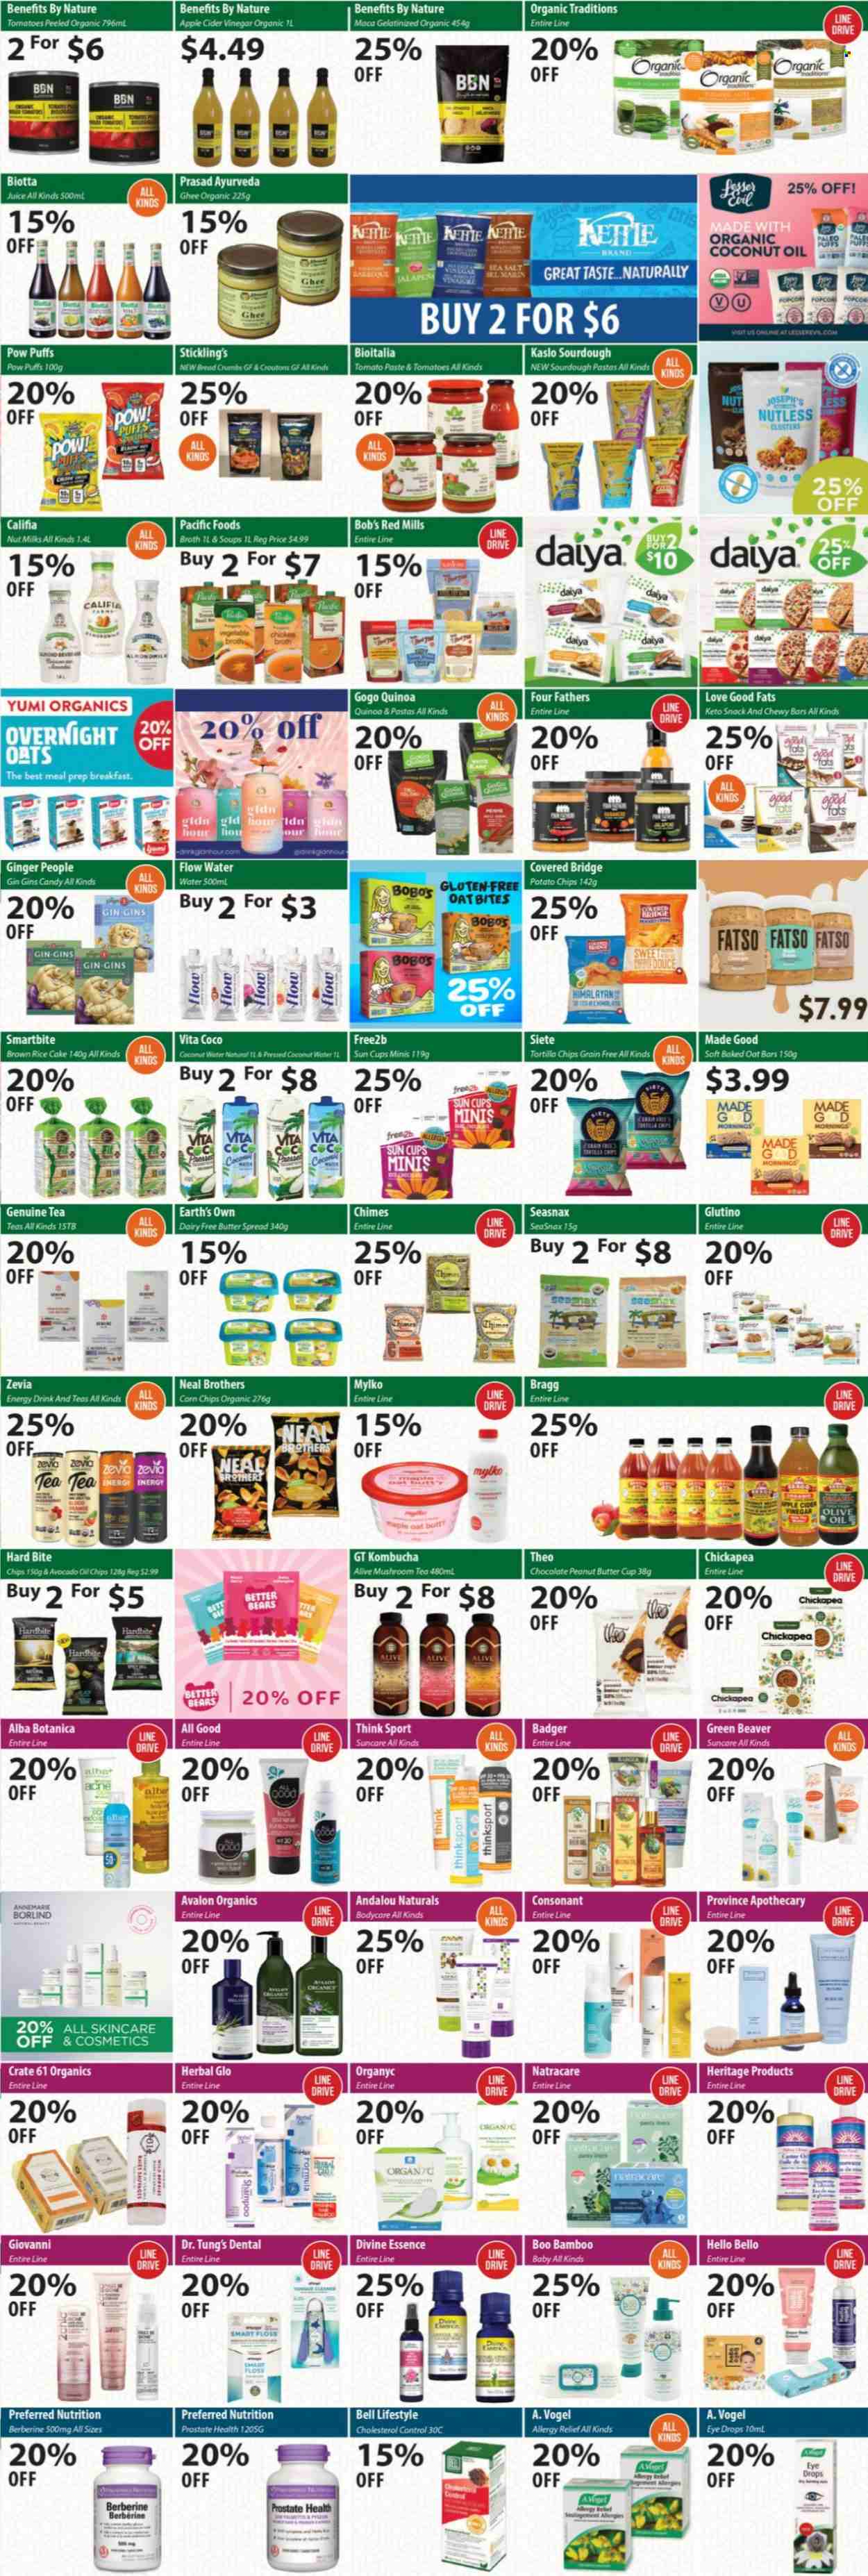 thumbnail - Healthy Planet Flyer - May 12, 2022 - June 15, 2022 - Sales products - chocolate, snack, peanut butter cups, tortilla chips, potato chips, chips, corn chips, croutons, chicken broth, broth, tomato paste, mushrooms, puffs, brown rice, rice, ginger, apple cider vinegar, avocado oil, coconut oil, oil, peanut butter, juice, energy drink, coconut water, flavored water, kombucha, tea, gin, BROTHERS, Organyc, eye drops, allergy relief, quinoa, shampoo. Page 4.